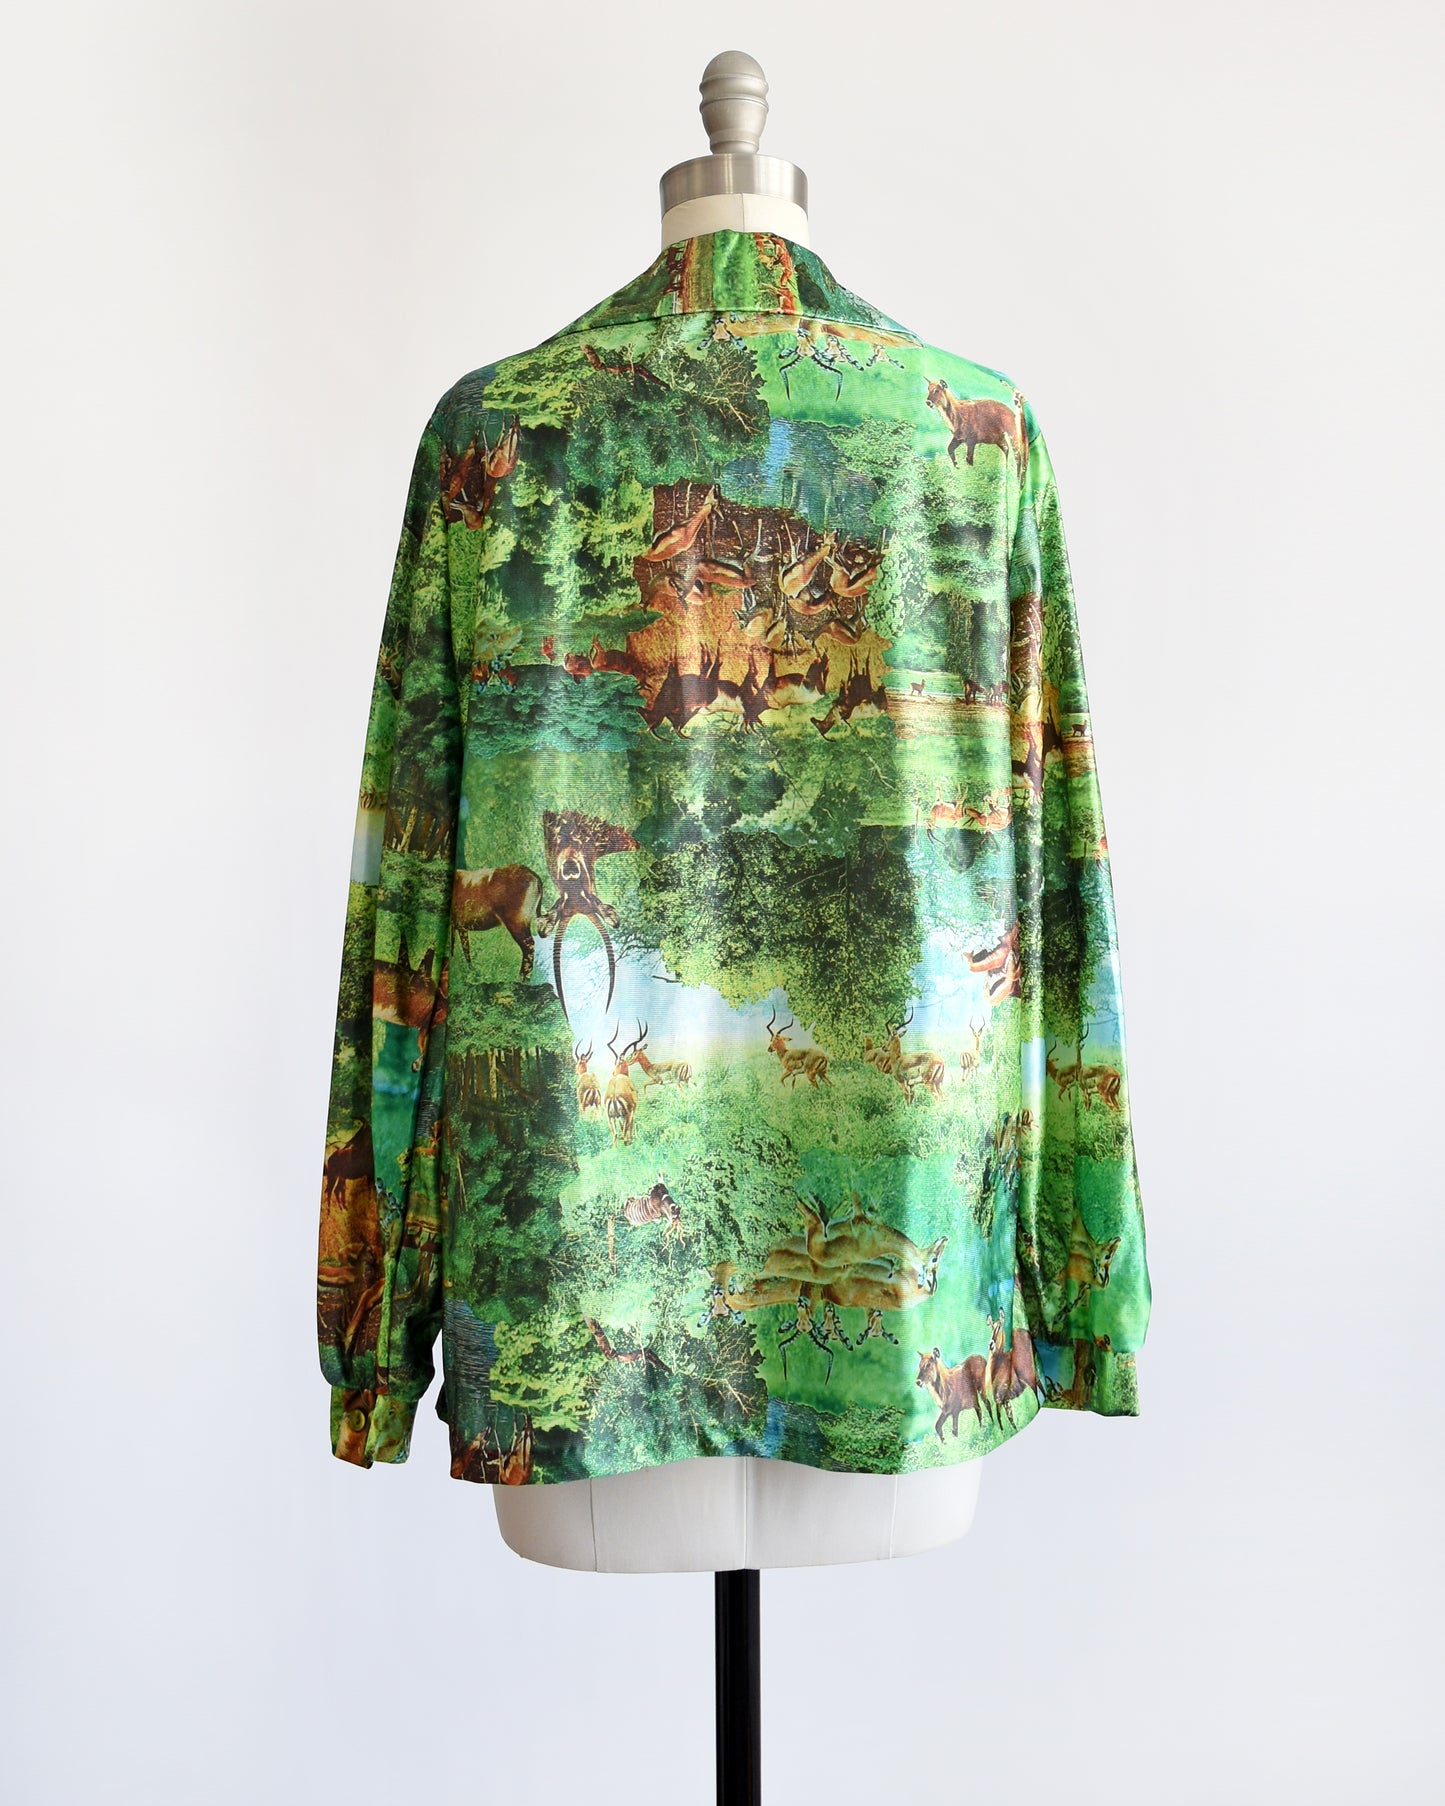 Back view of a vintage 70s green disco blouse that features a realistic photo print of different antelopes in different settings.